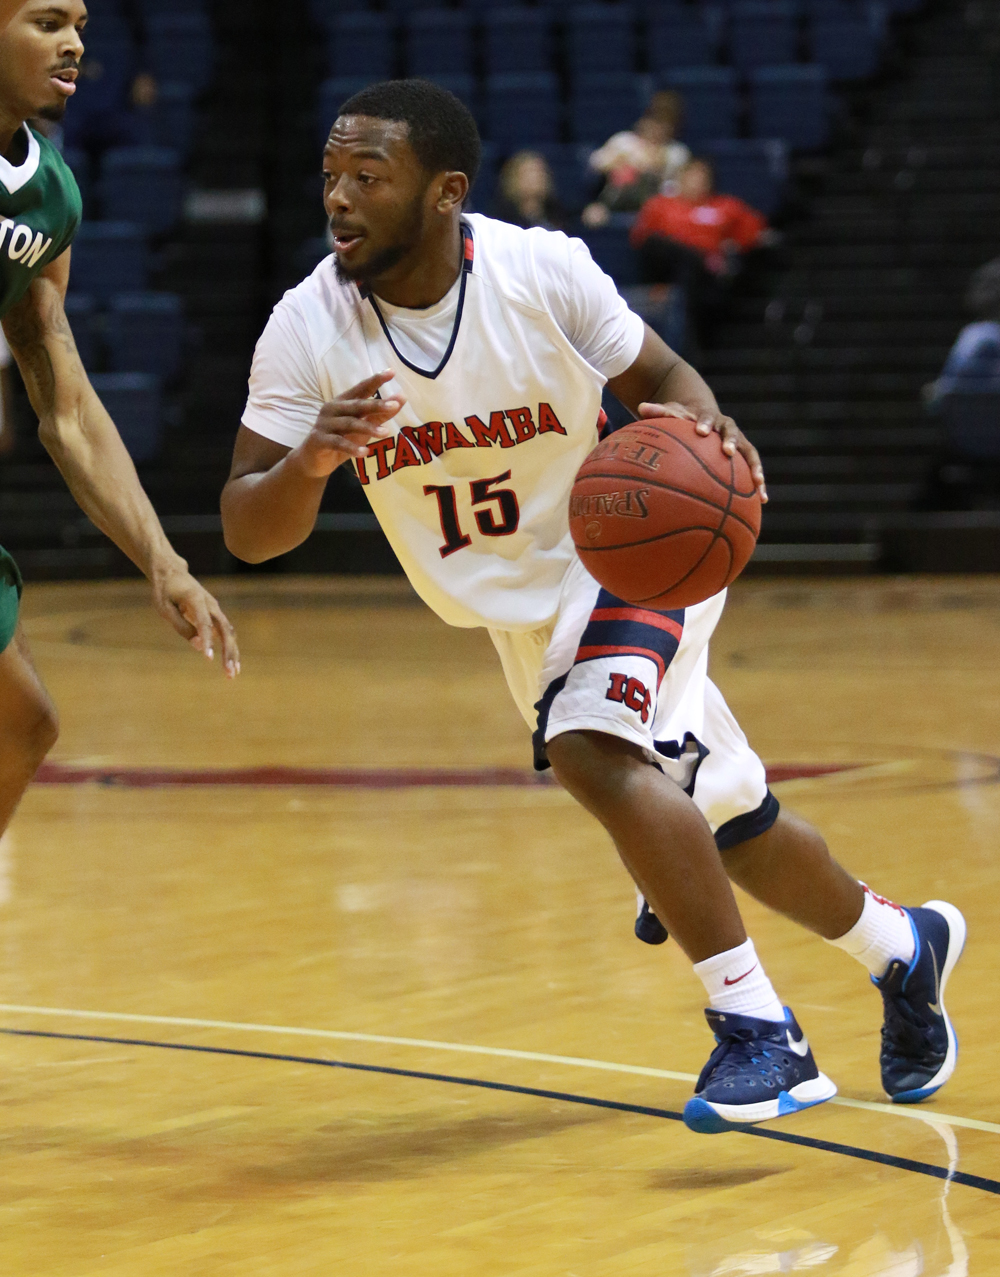 Taylor's buzzer beater gives Indians upset win over No. 19 Shelton State